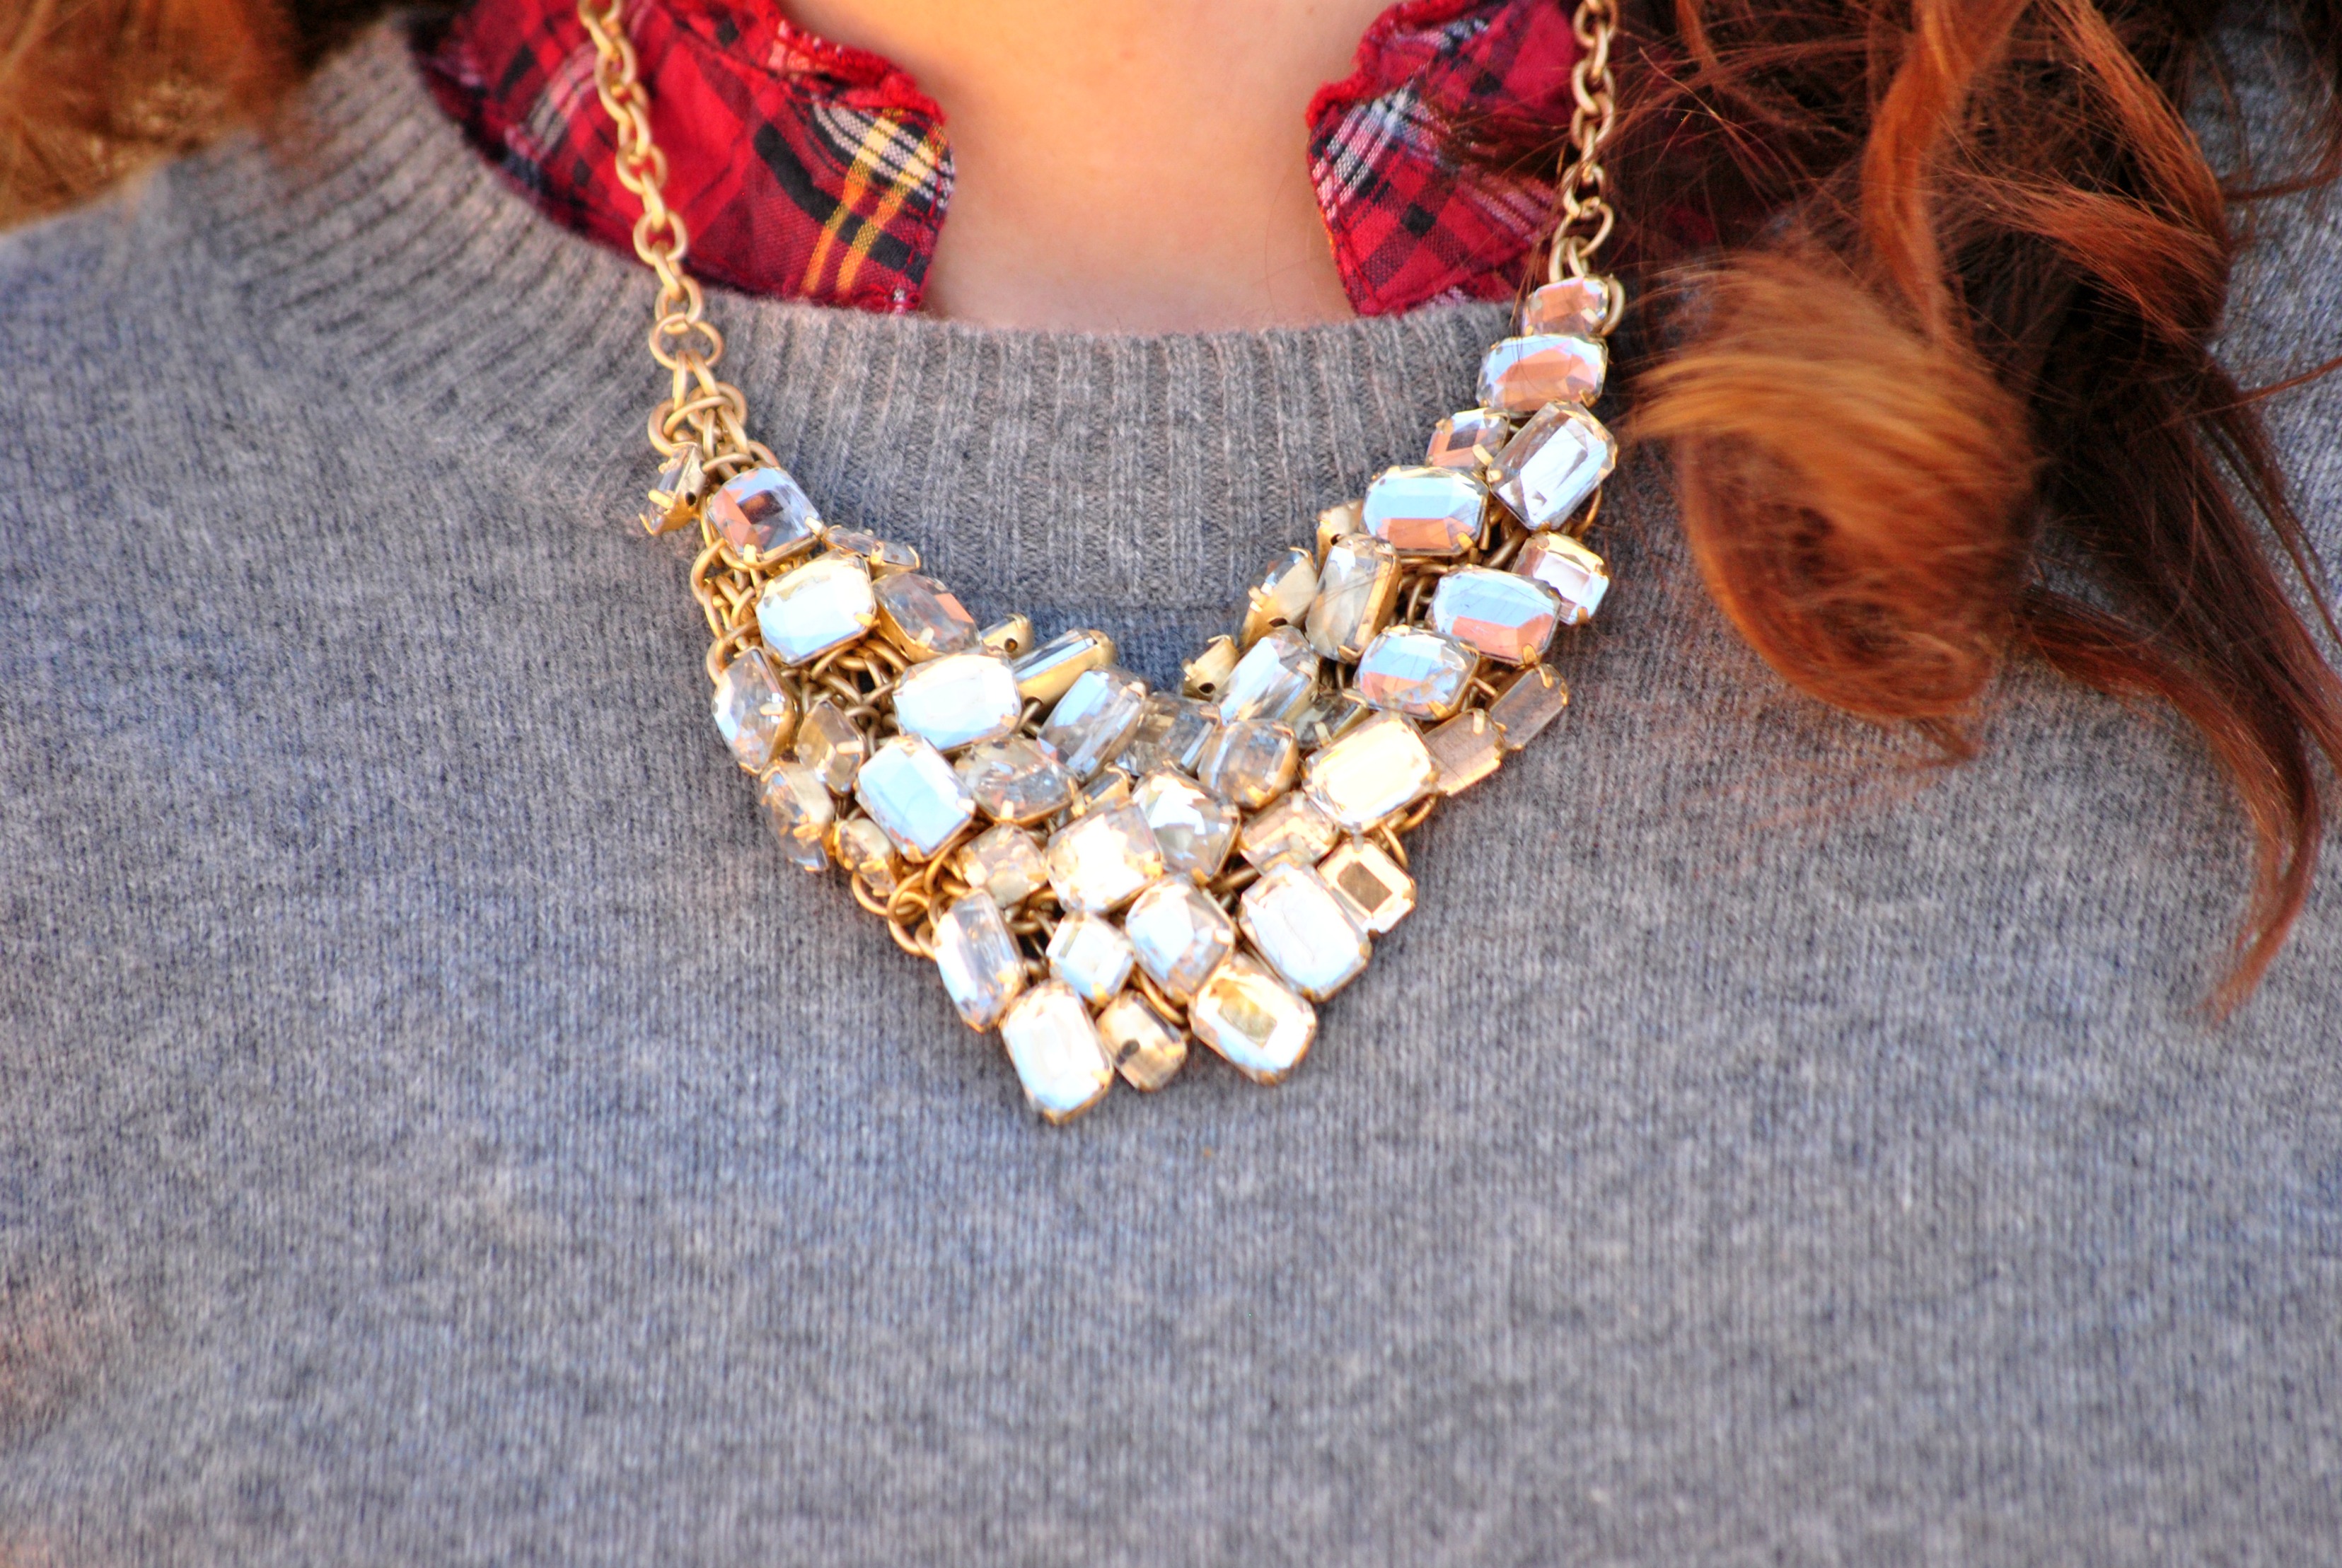 Grey sweater and statement necklace